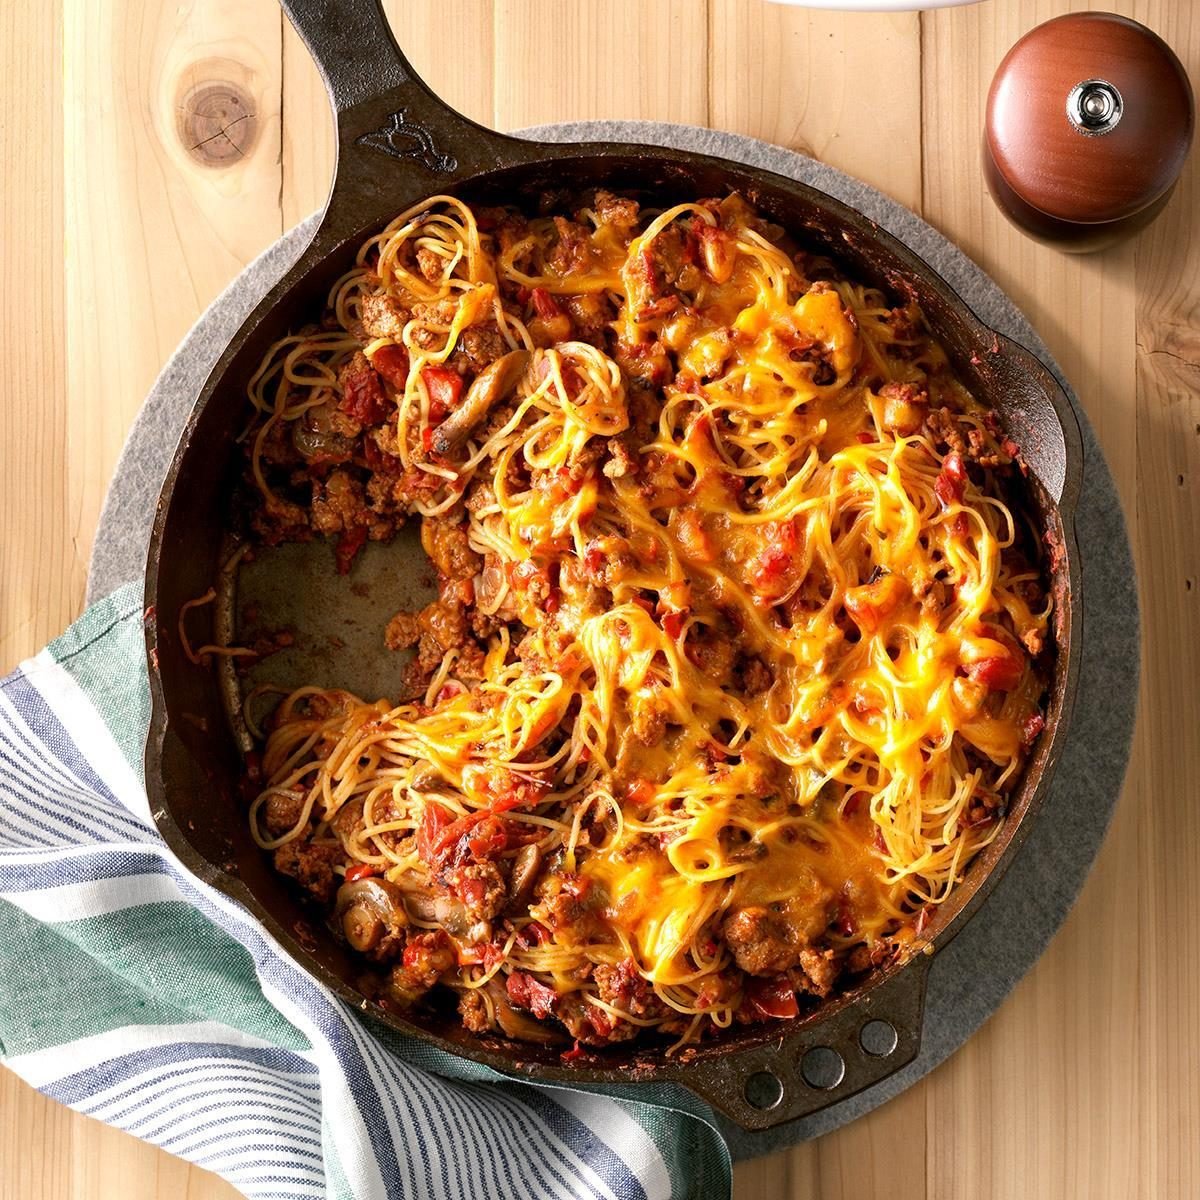 38 One-Dish Meals to Make in Your Cast-Iron Skillet